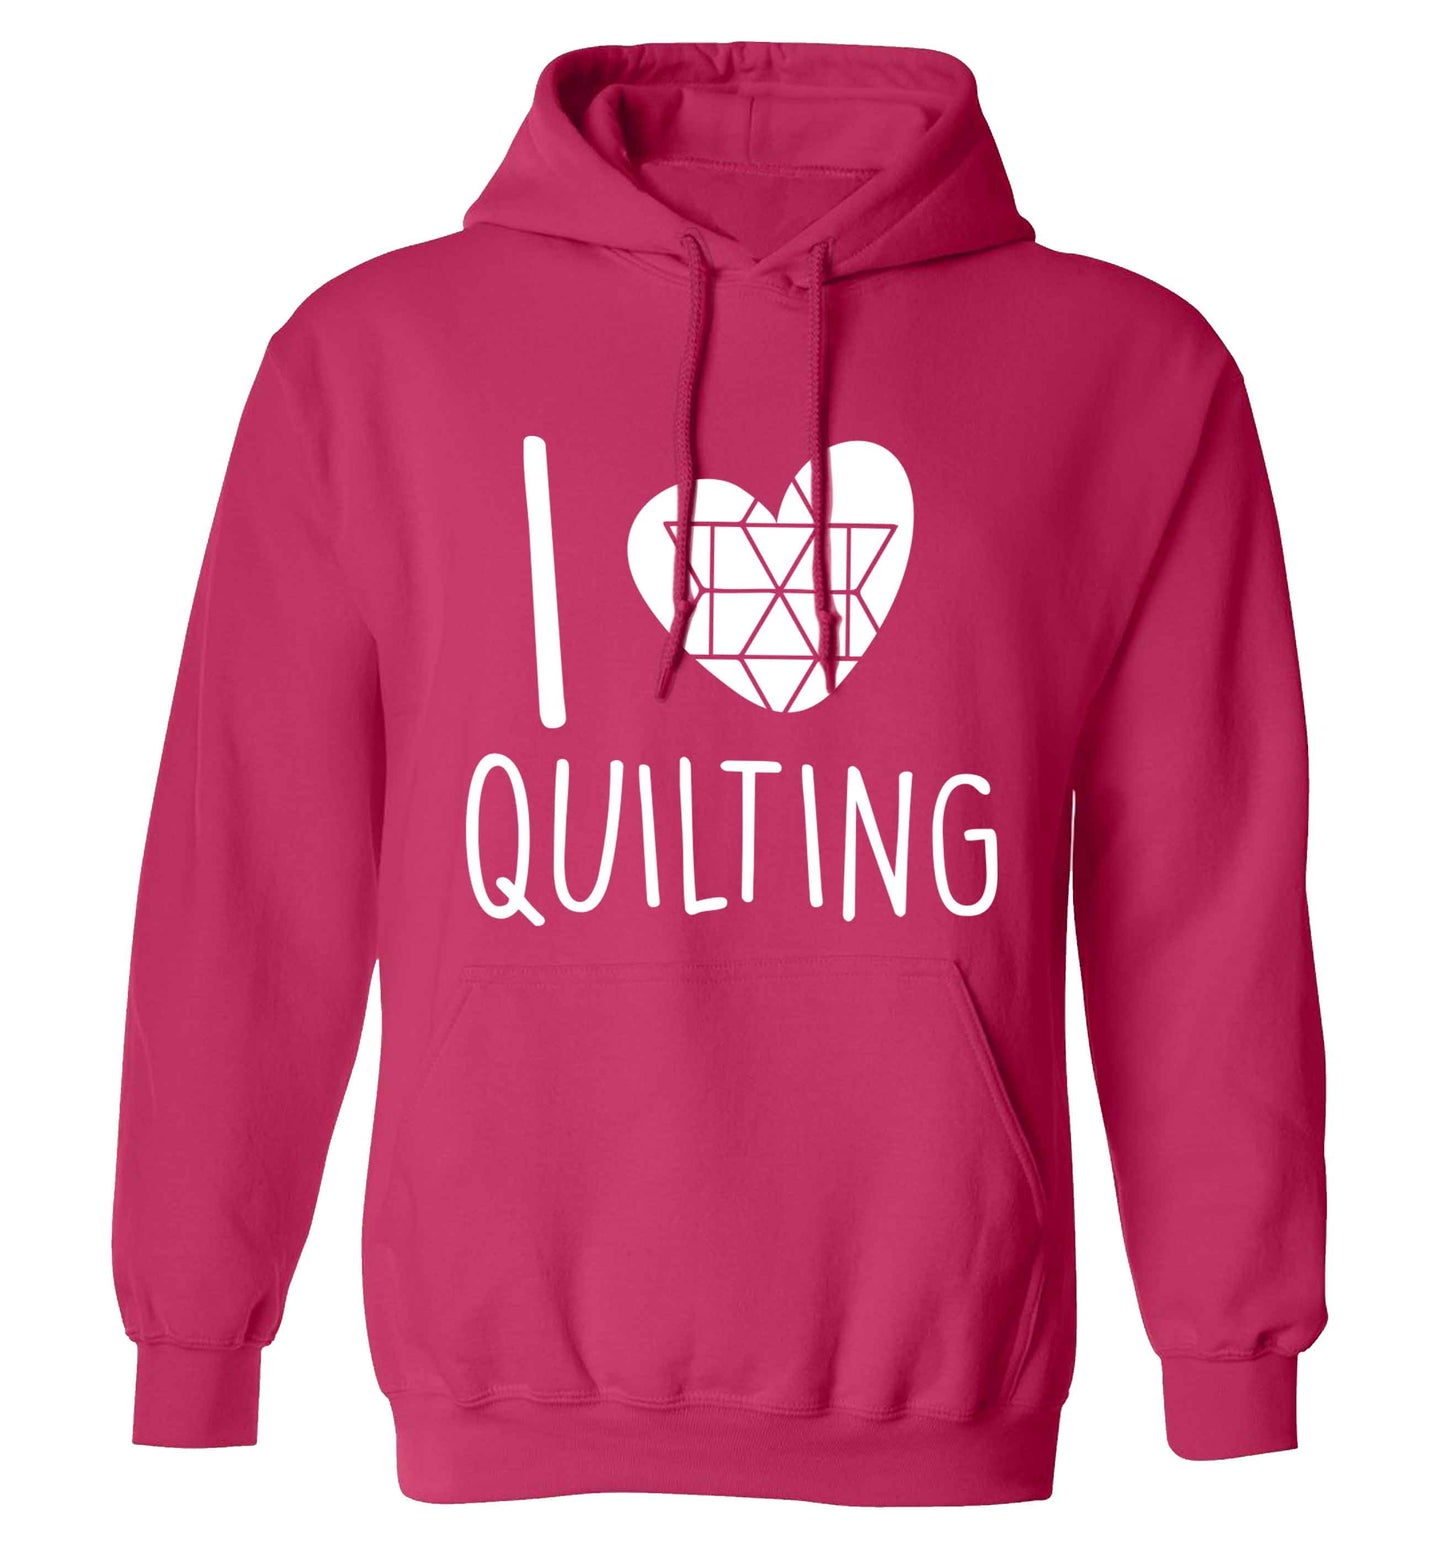 I love quilting adults unisex pink hoodie 2XL